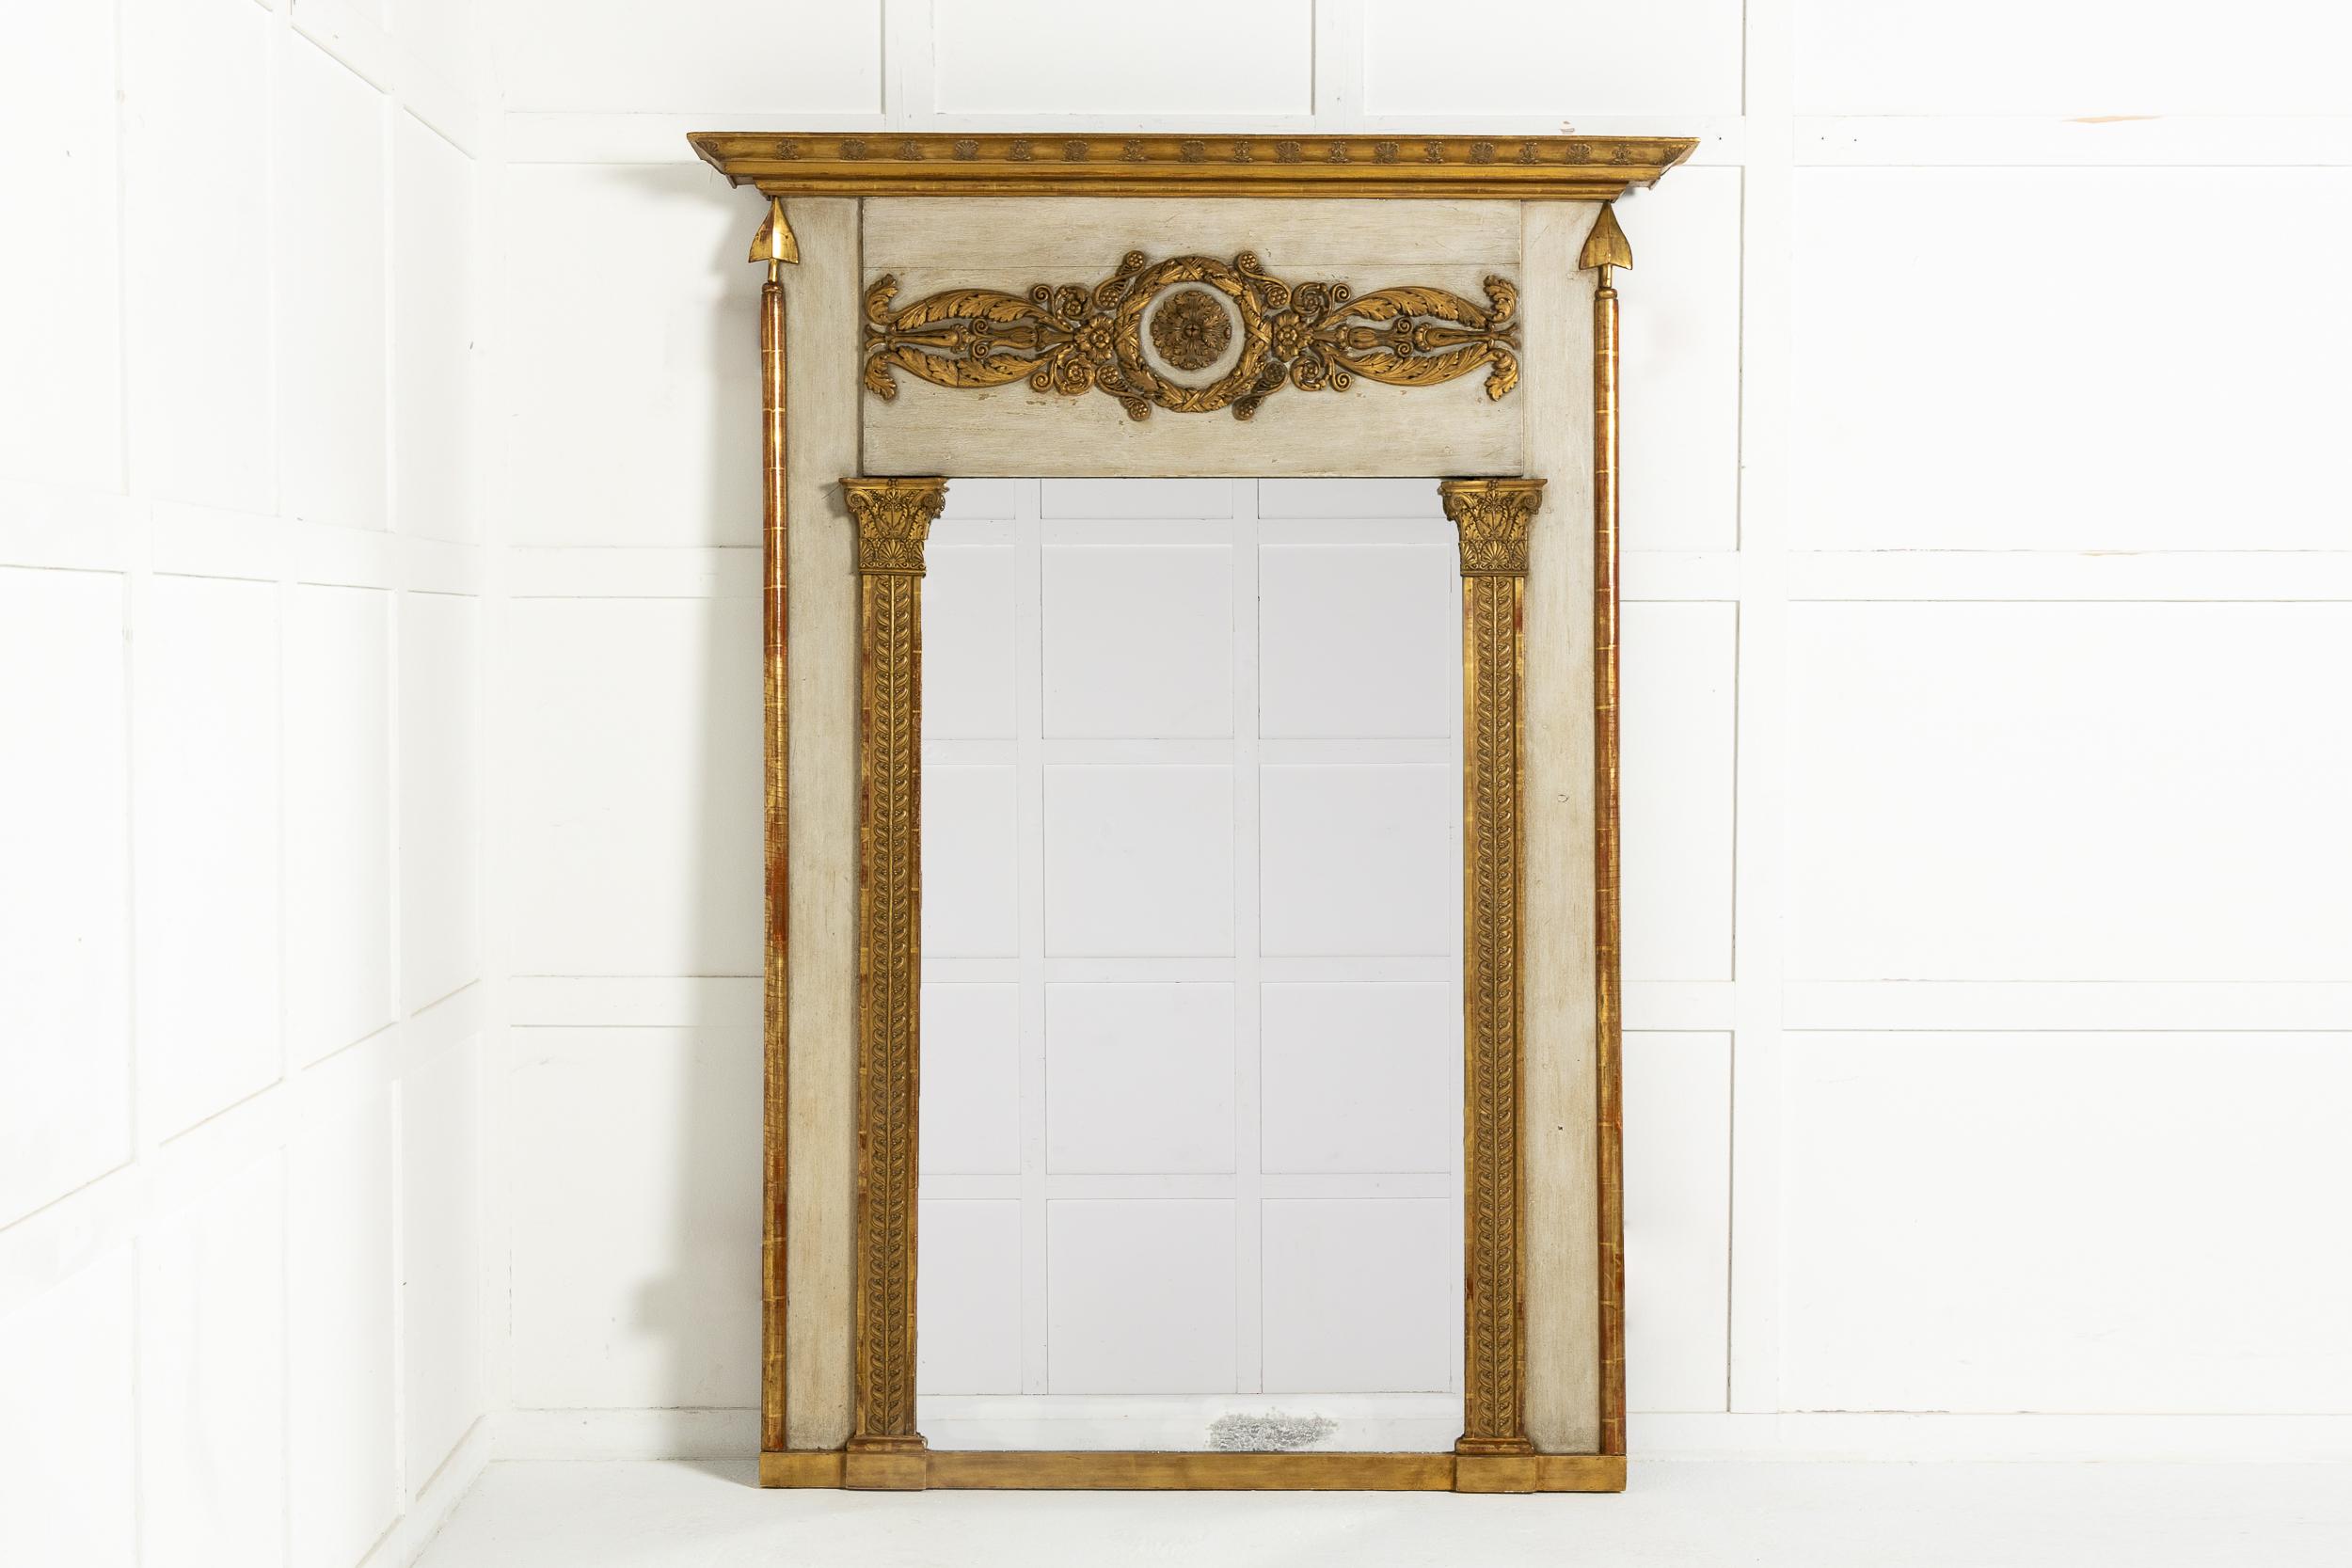 An exceptional model of a large 19th century French mirror with its original paint, gilt and glass. Having a cornice top with relief carvings and large decorative foliate carvings with a central rosette in the frieze below. The glass is flanked by